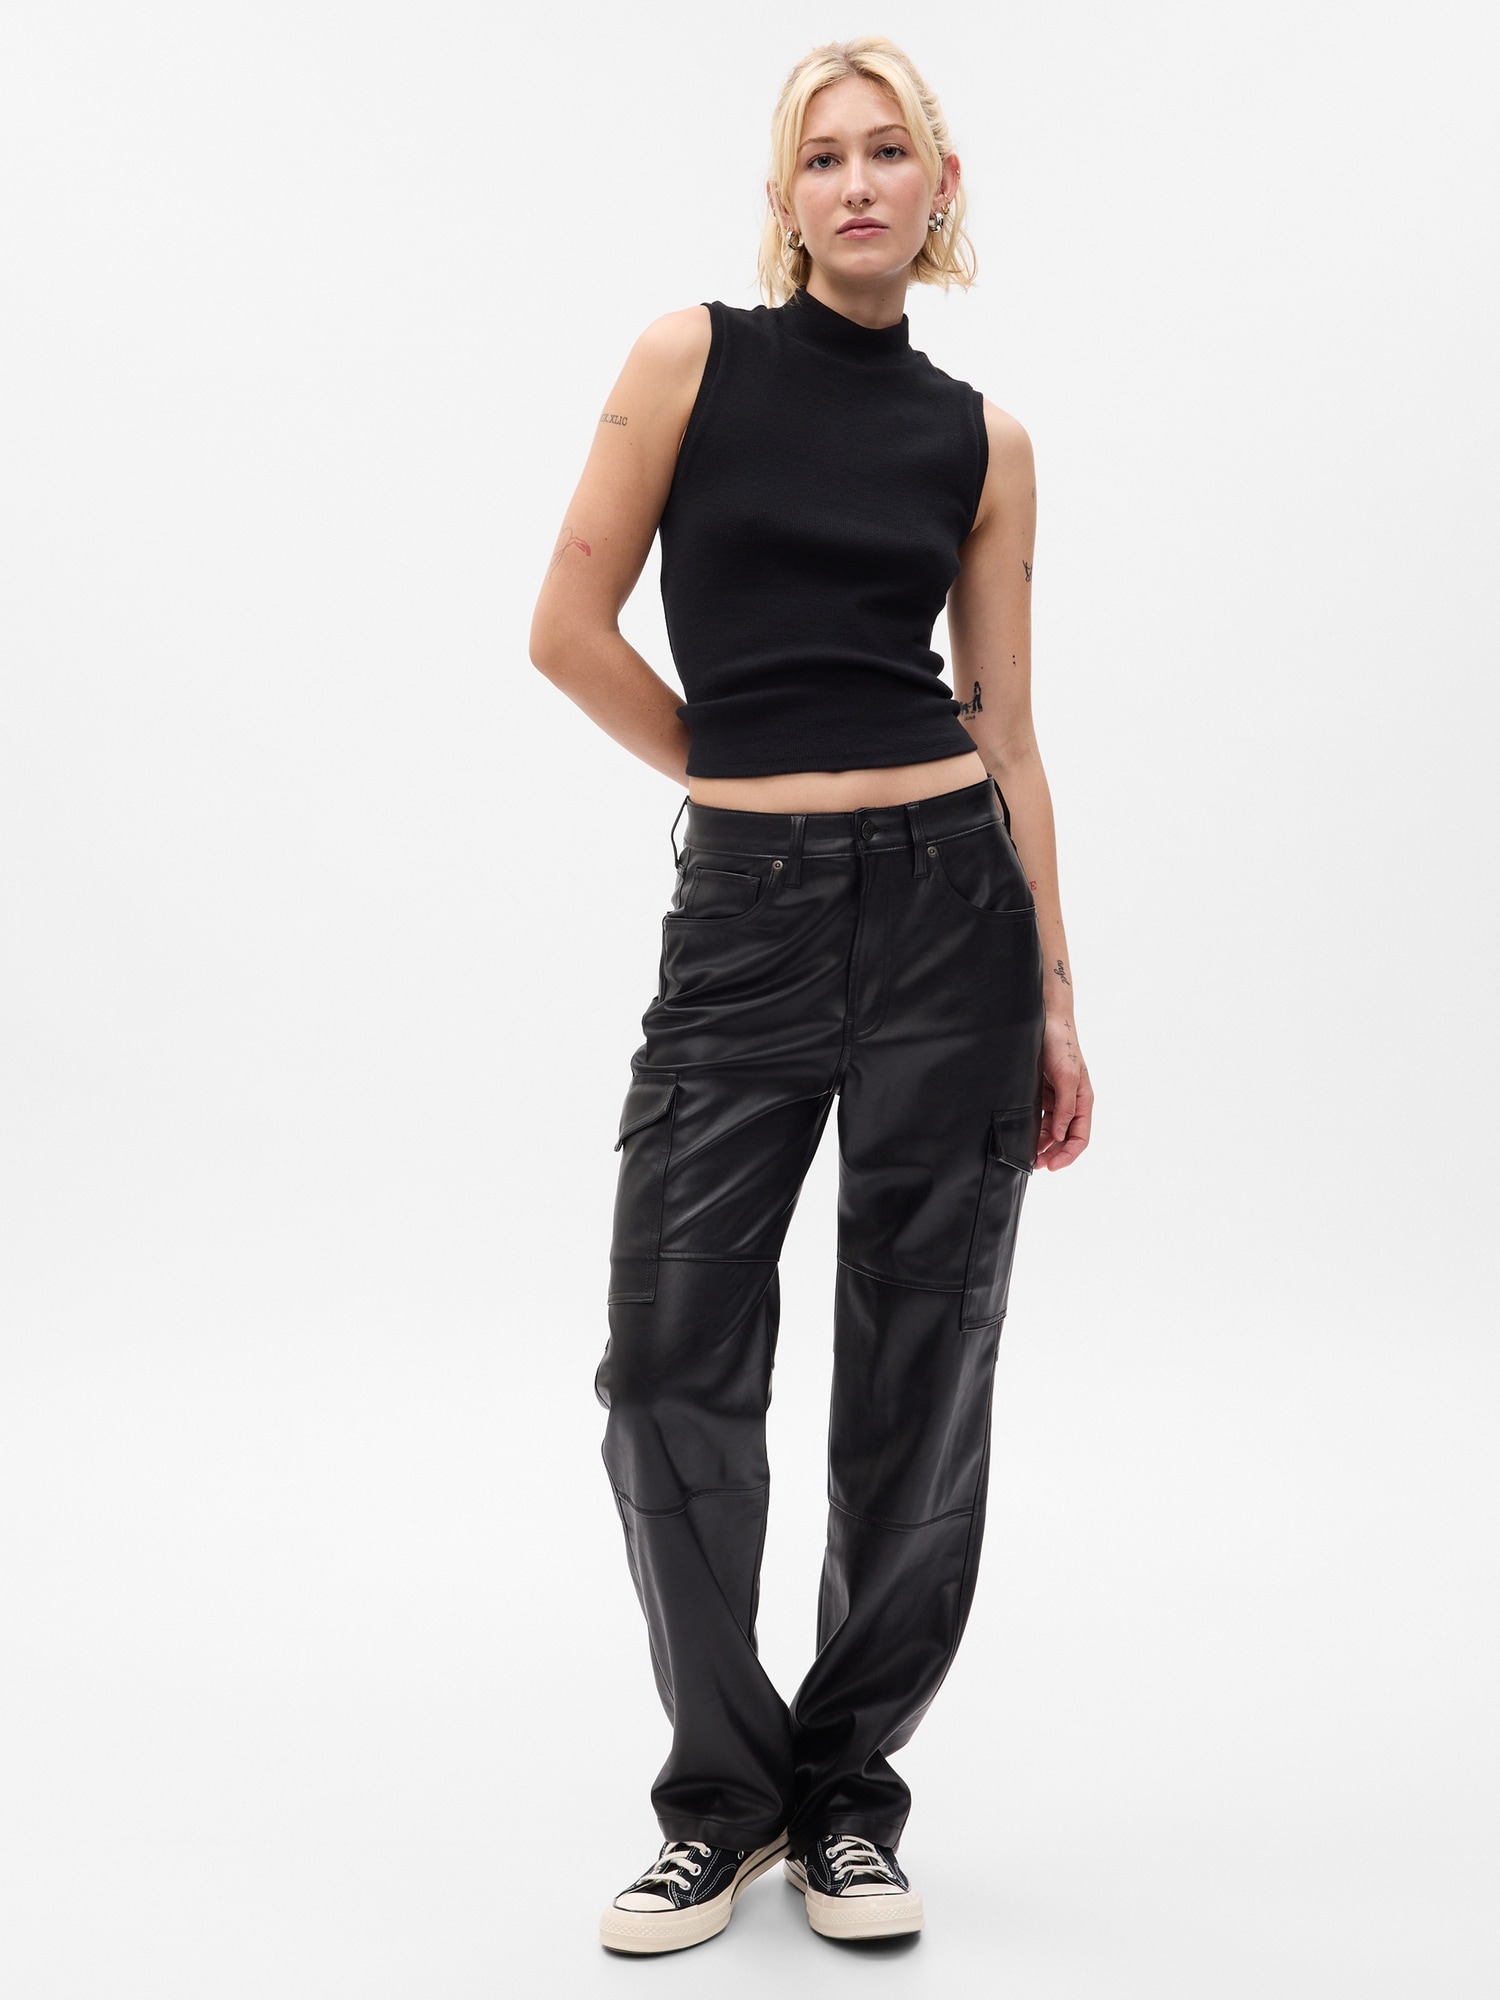 FAUX LEATHER CARGO TROUSERS - Black